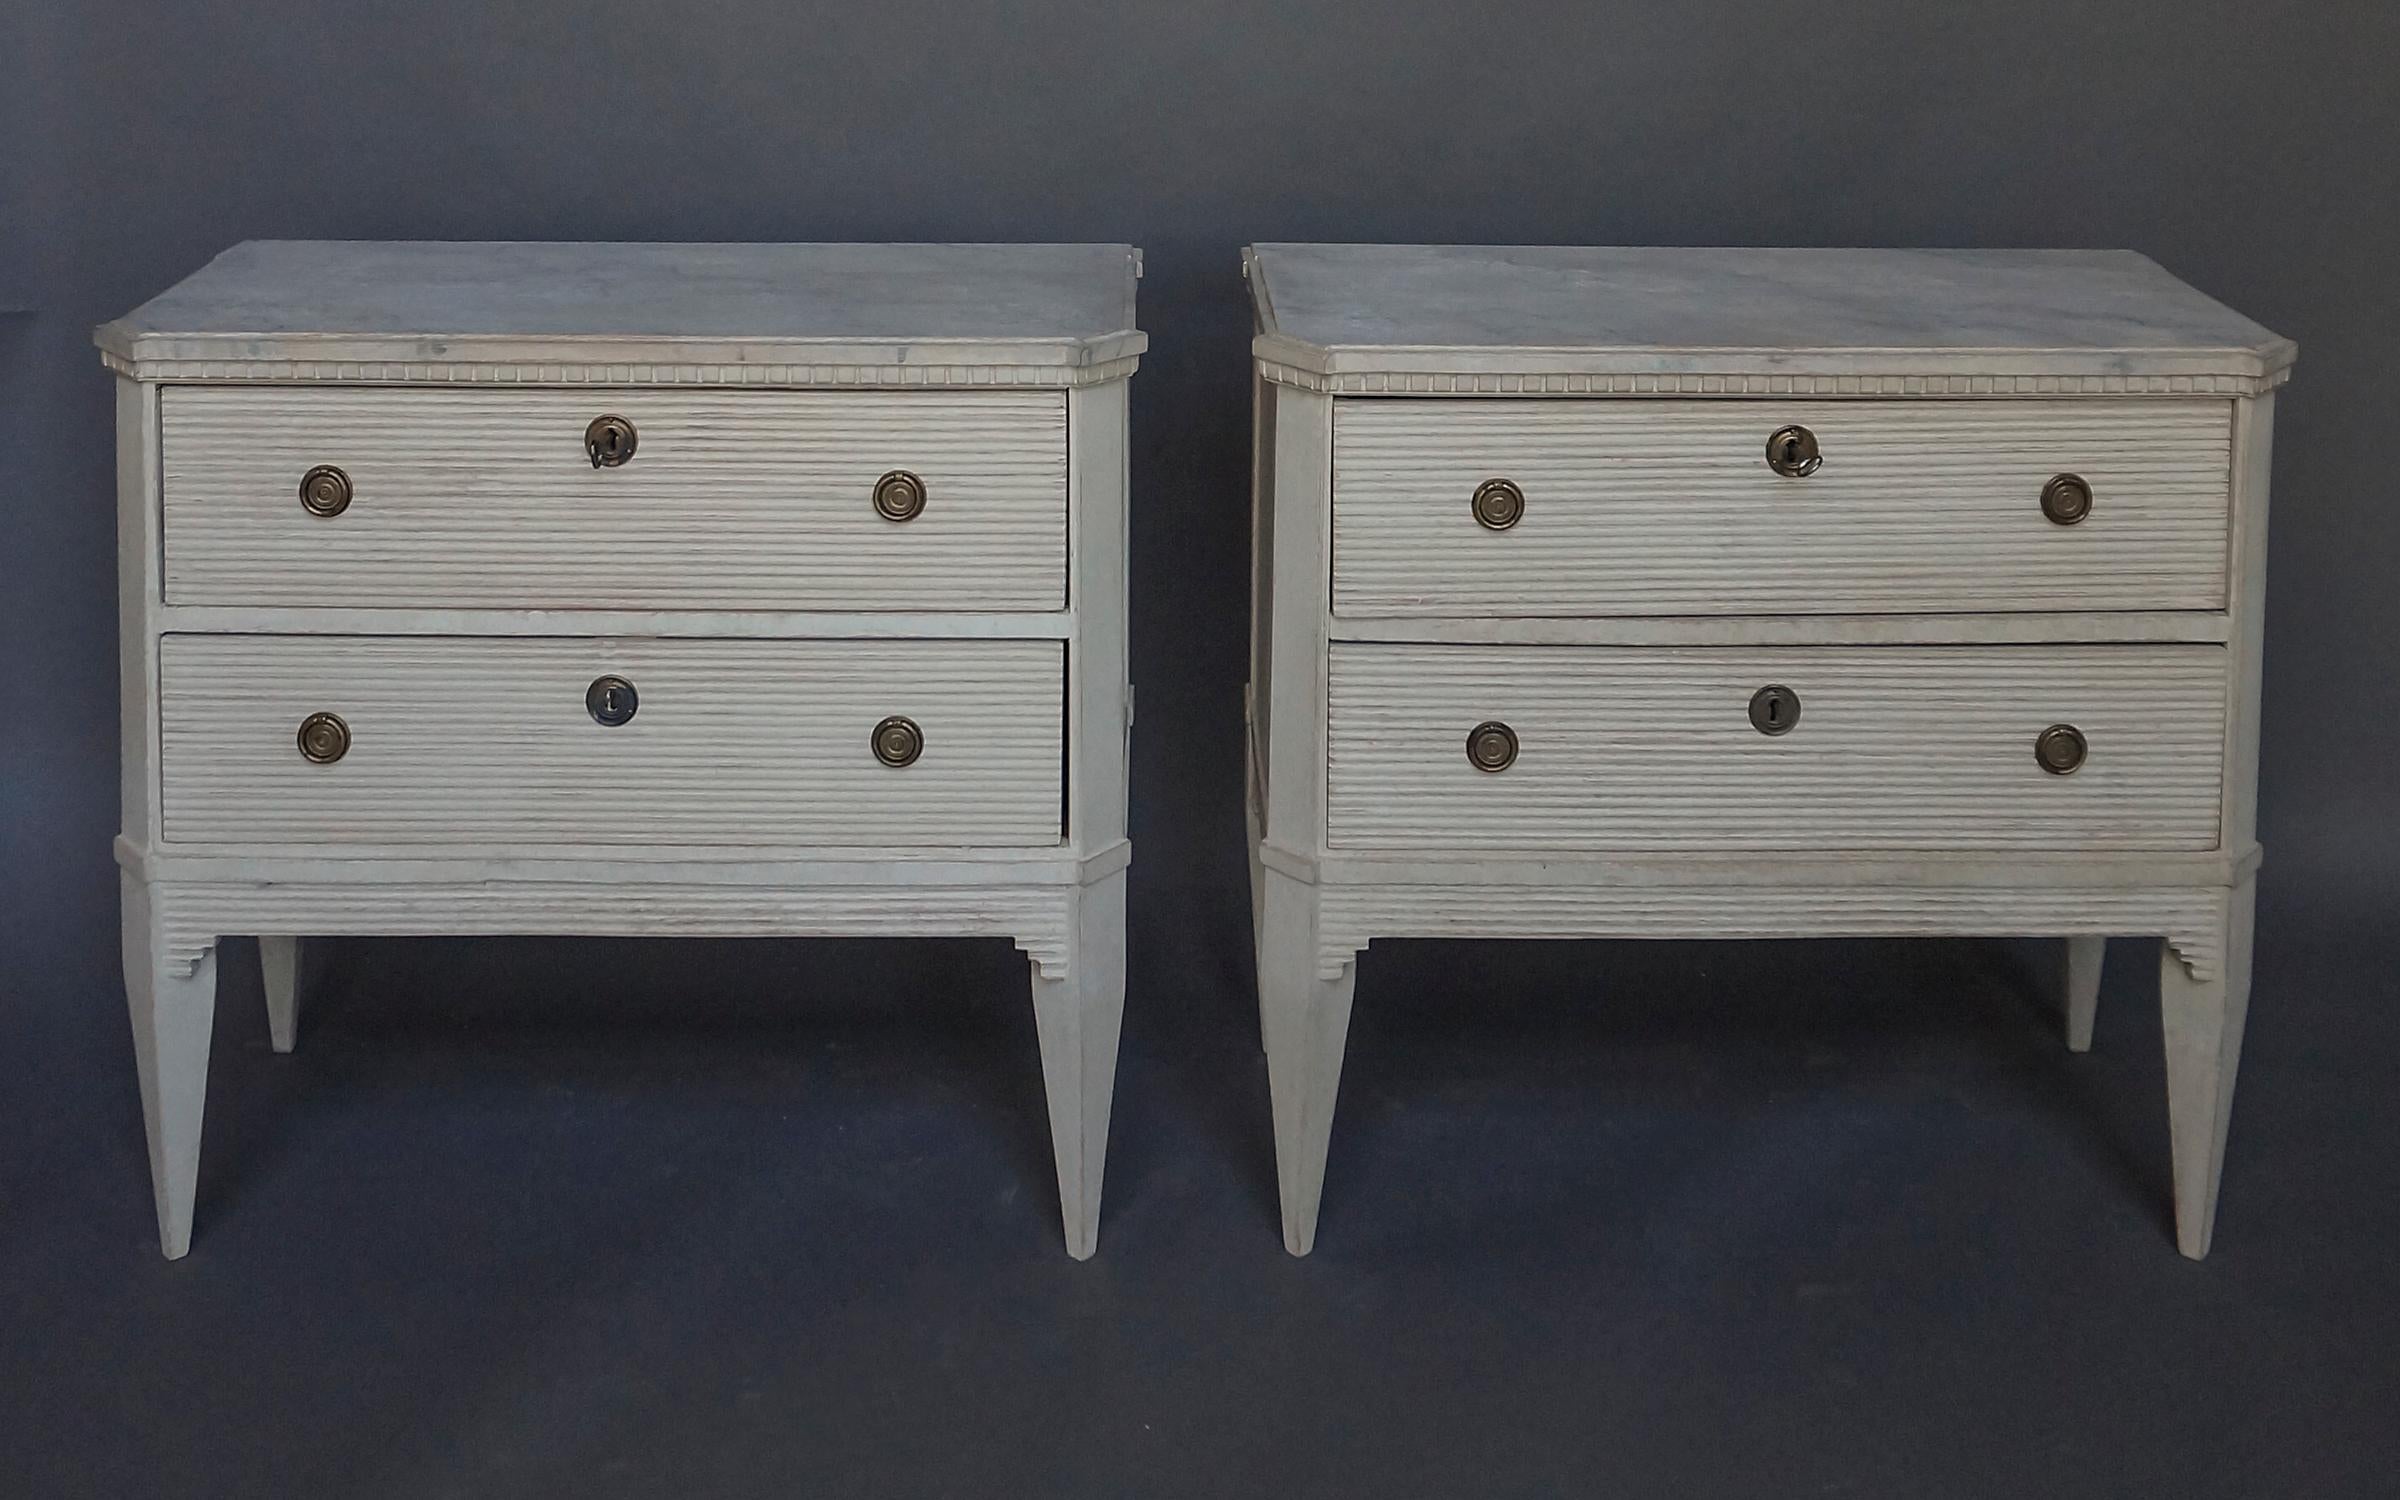 Pair of Swedish Commodes in the Gustavian Style (Schwedisch)